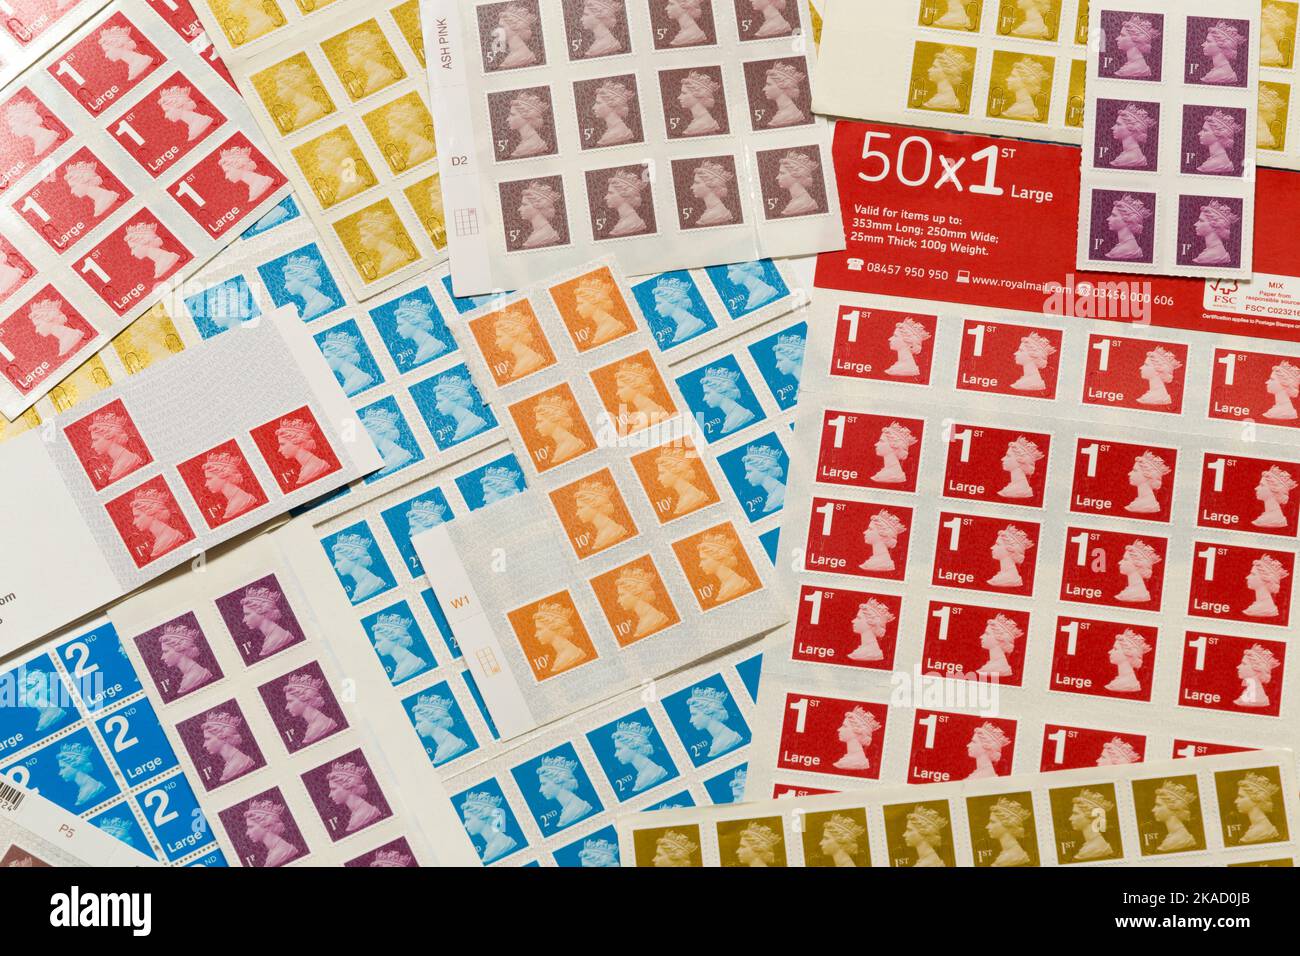 An array of new and unused but old style traditional postage stamps issued by the Royal Mail due for withdrawal from use in January 2023. They all feature a profile portrait of Queen Elizabeth the second, QE2, the late Queen of the UK. (132) Stock Photo